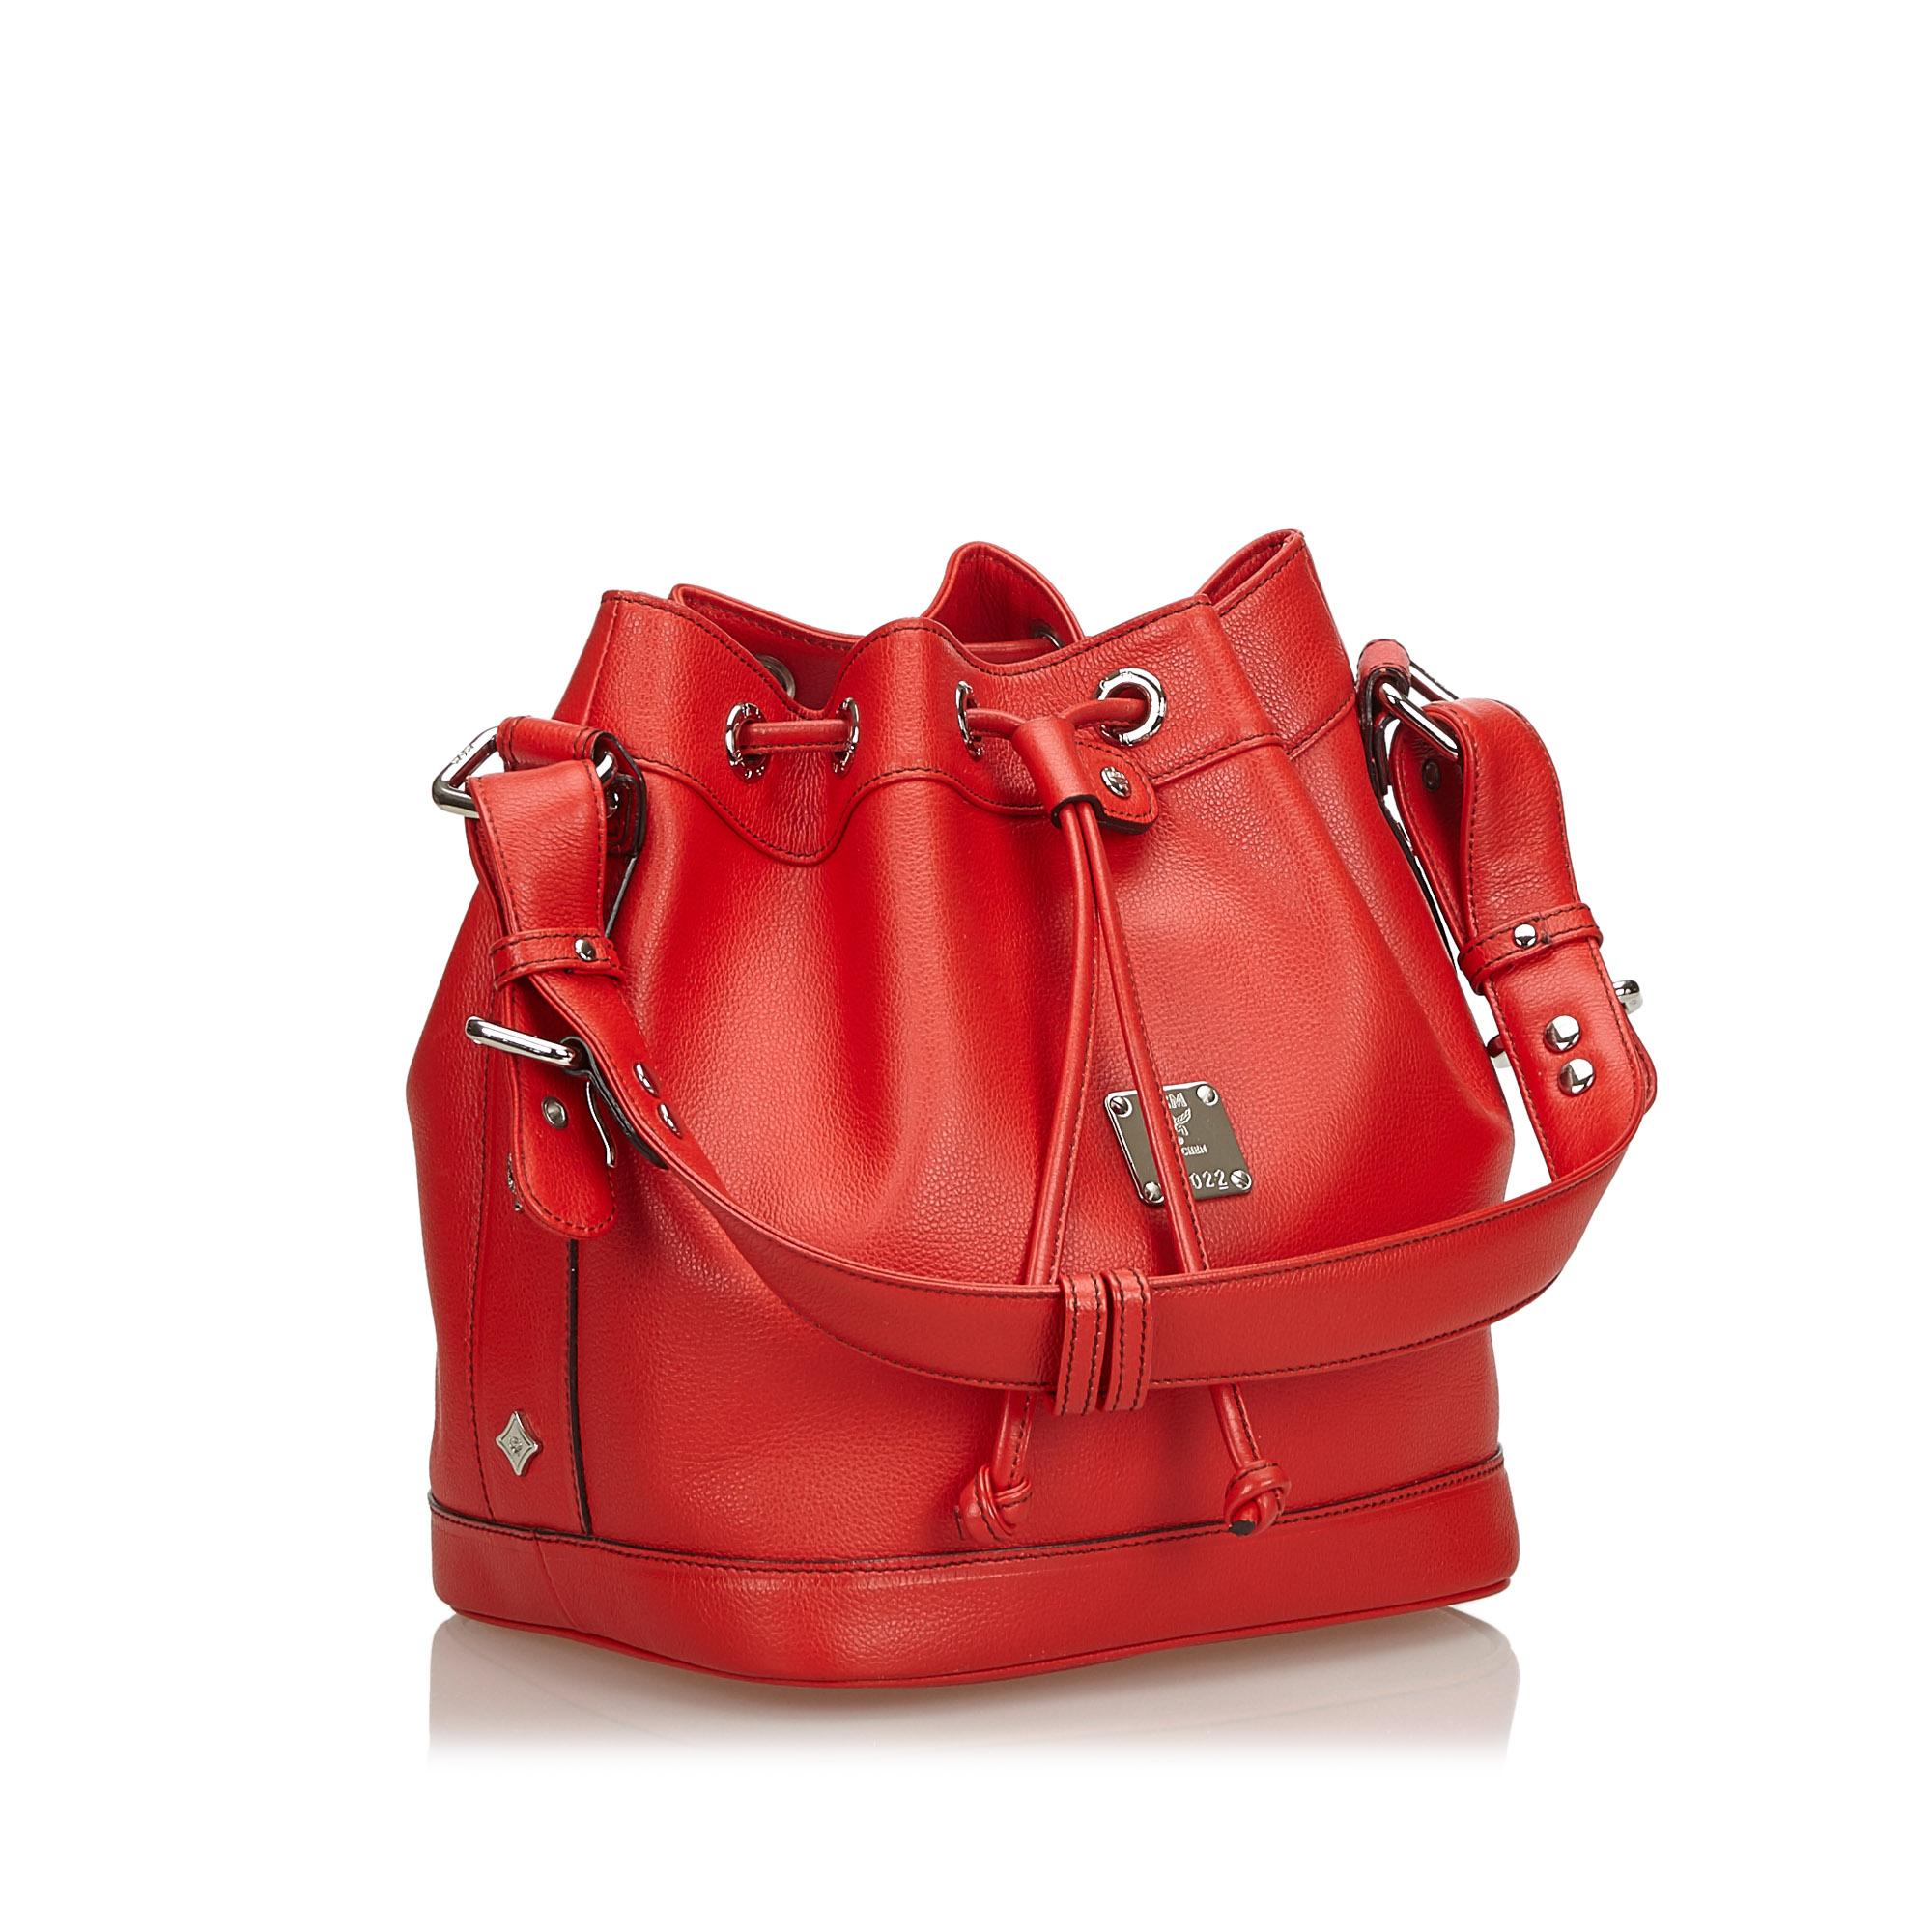 This bucket bag features a leather body, a flat leather strap, a drawstring closure, and interior zip and slip pockets. It carries as A condition rating.

Inclusions: 
This item does not come with inclusions.

Dimensions:
Length: 26.00 cm
Width: